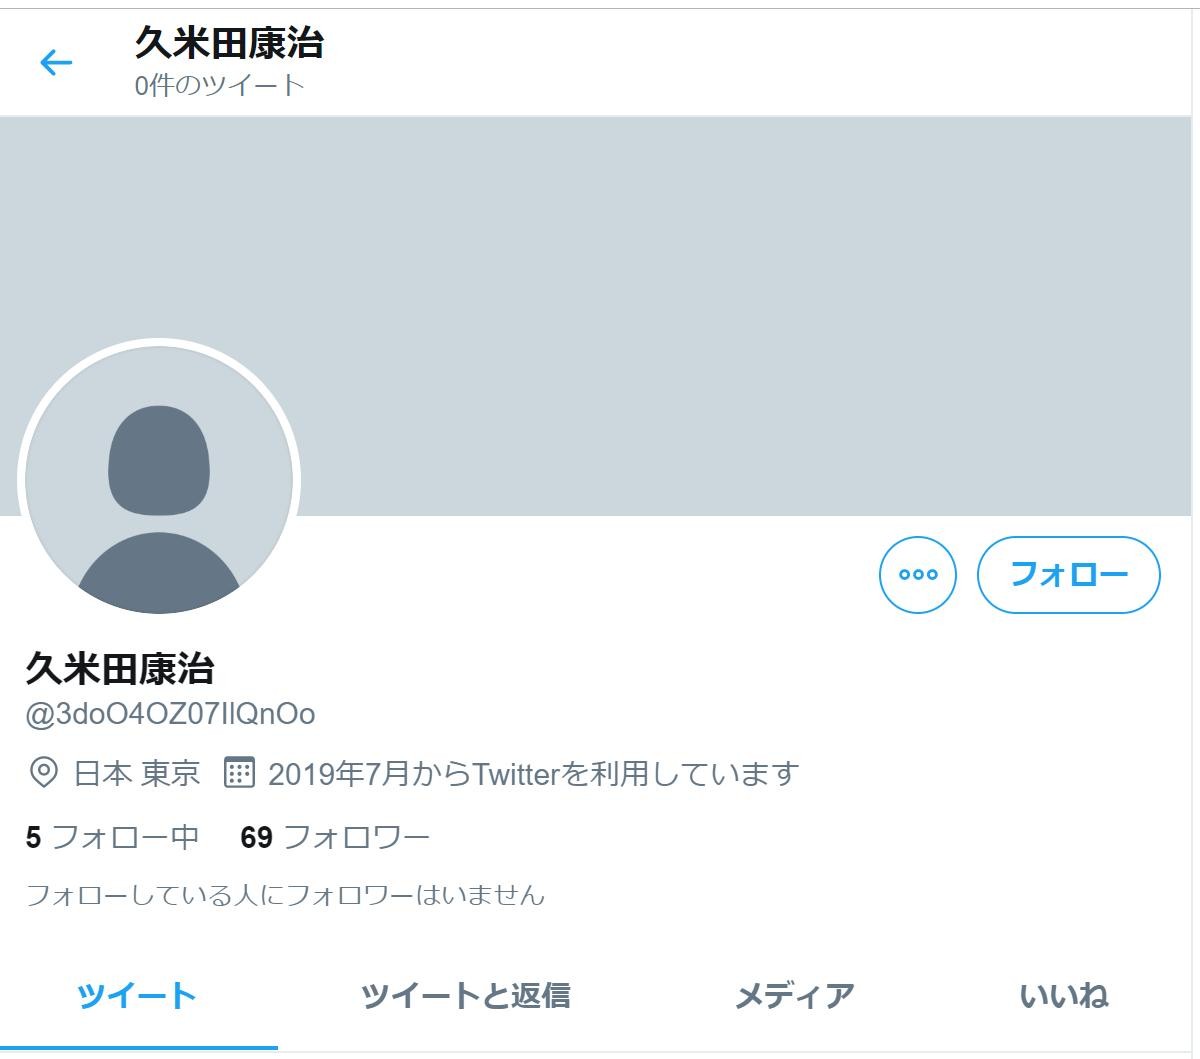 【lost hope! ] Koji Kumeda “I started Twitter on my real name but I can hardly follow me. What are fans like this?”